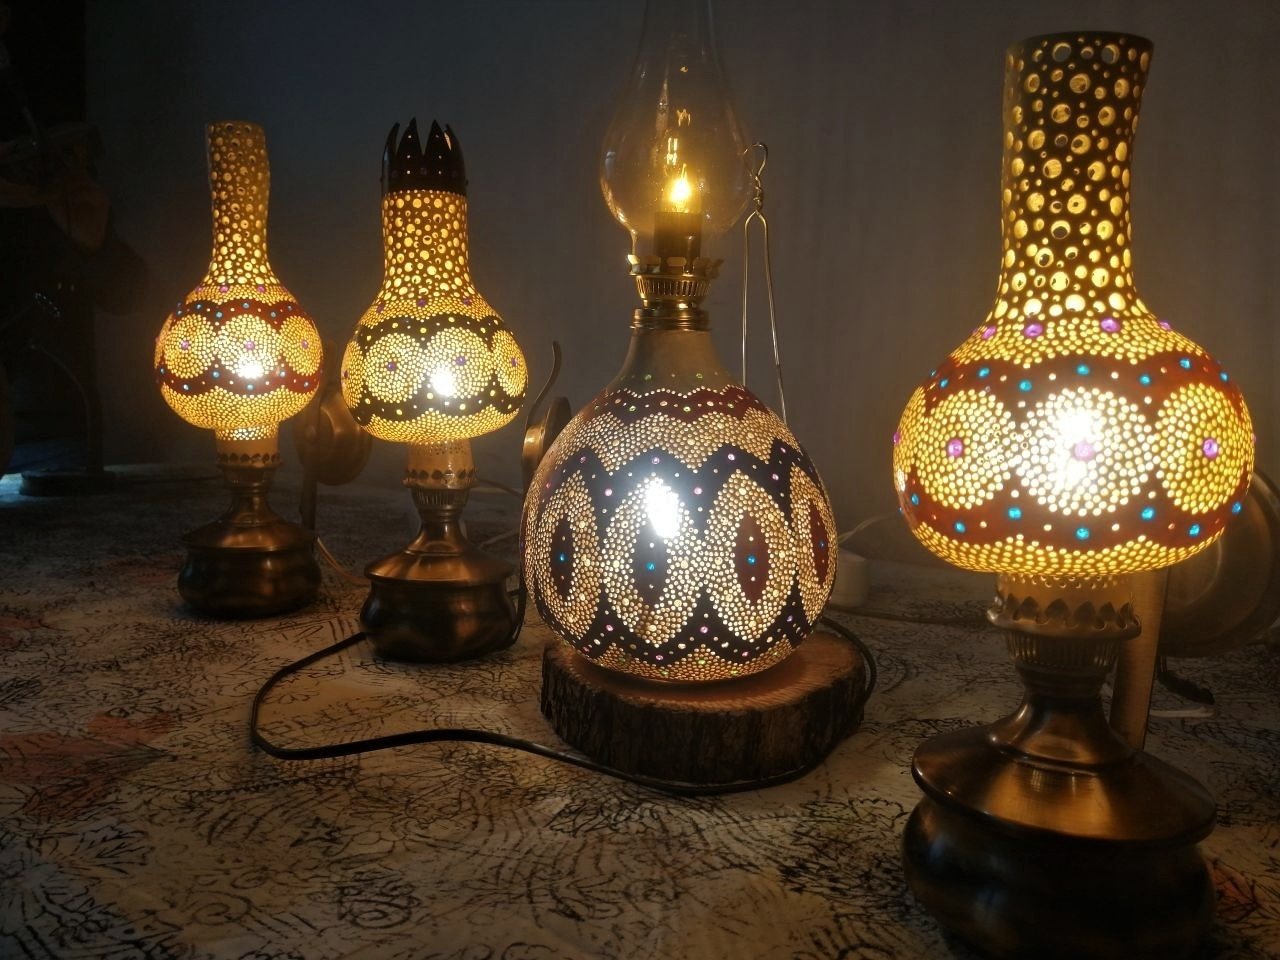 Turkish man's calabash lamp becomes countrywide business | Daily Sabah